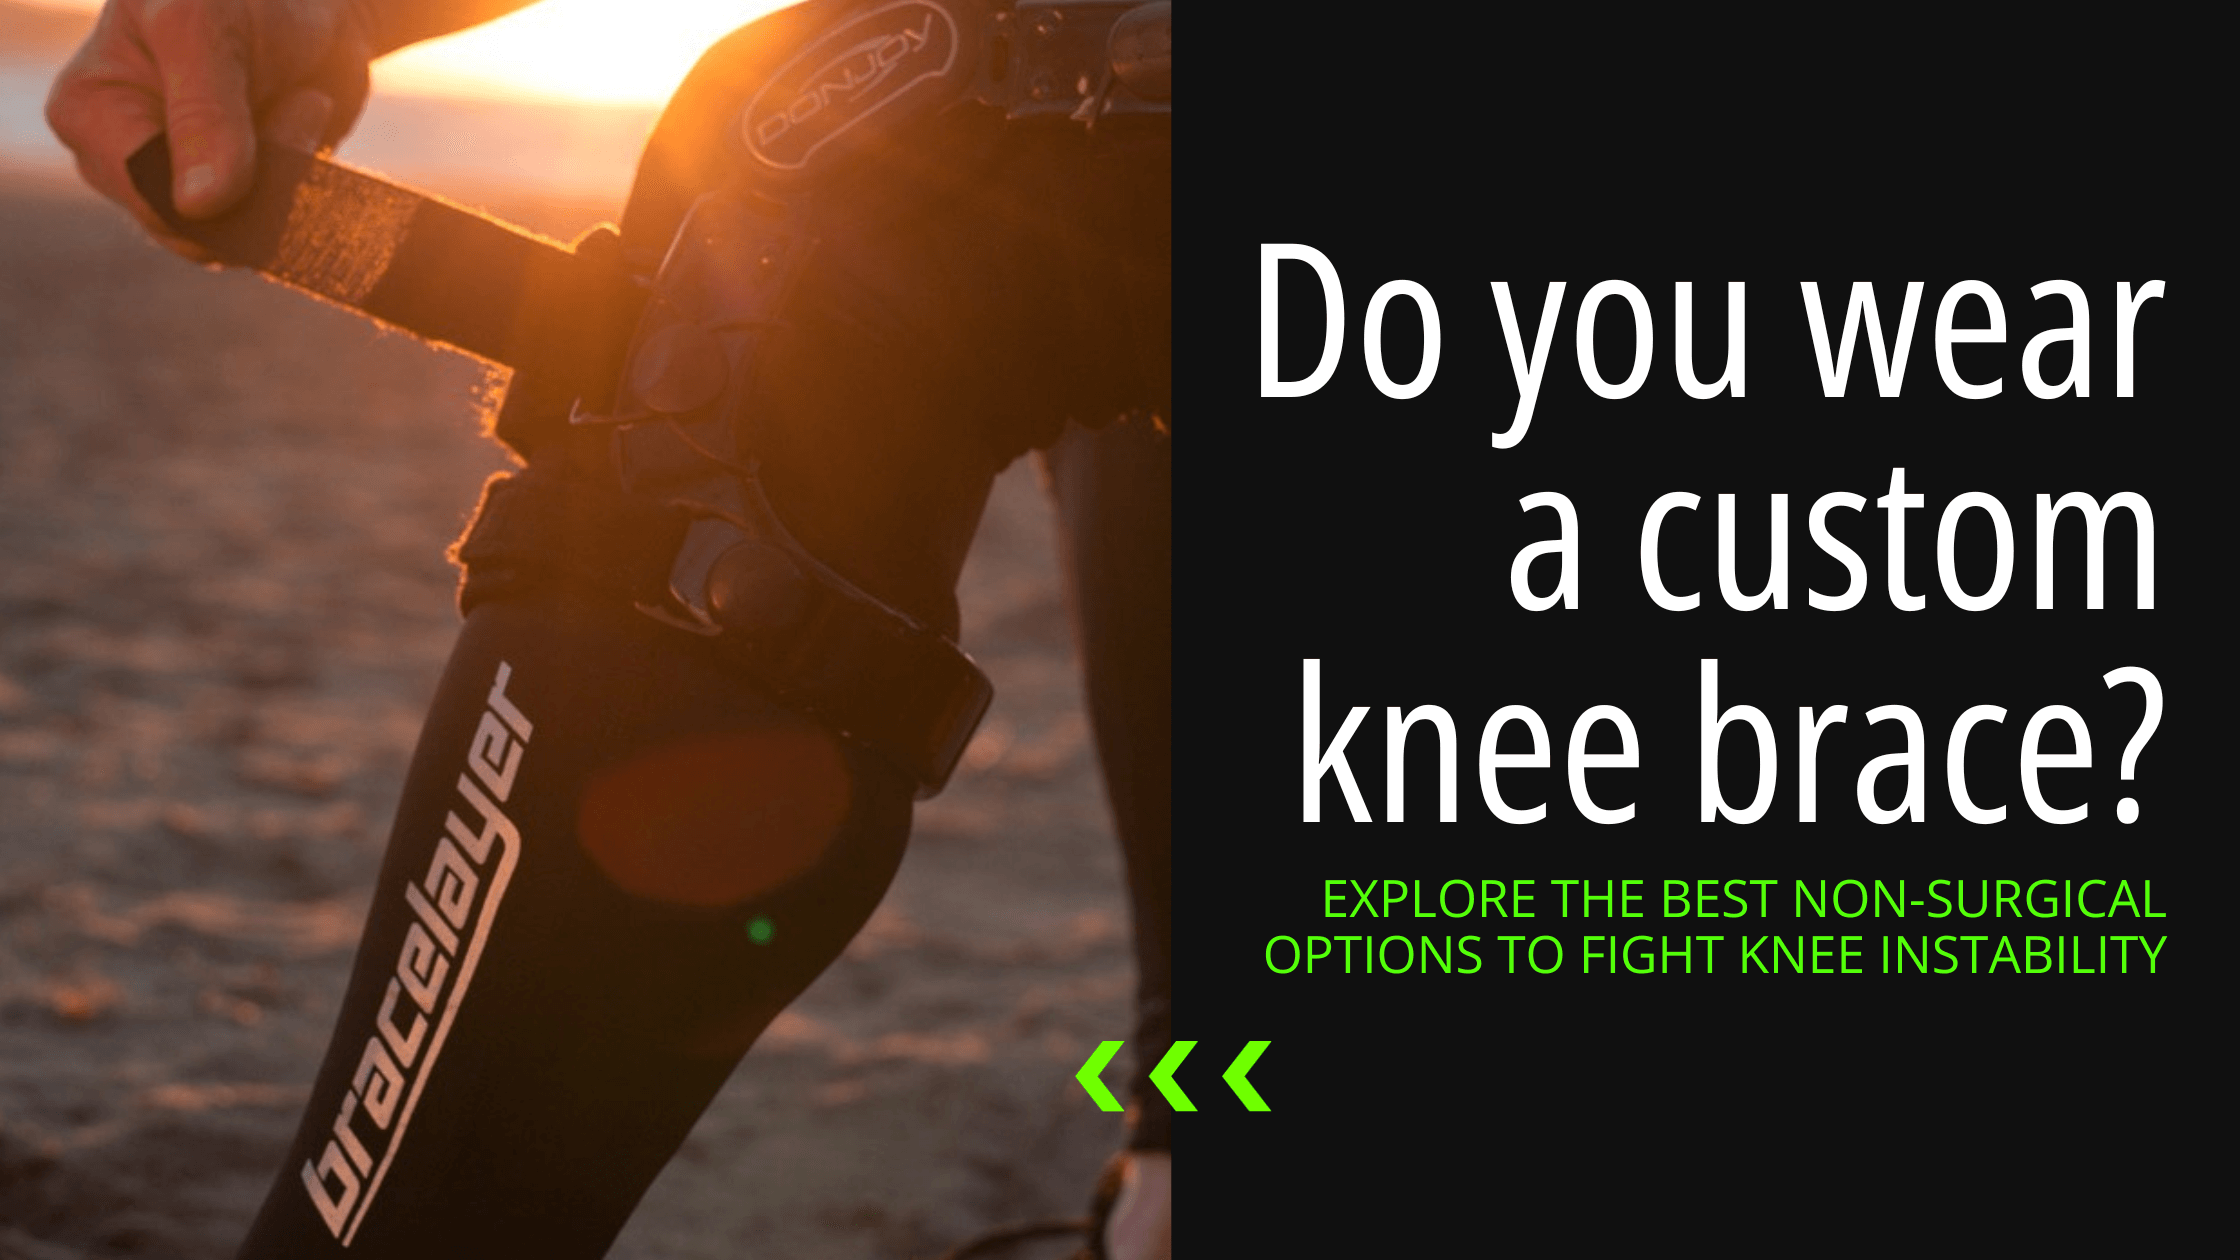 Blog header for our post: do you wear a custom knee brace to combat knee ligament instability?